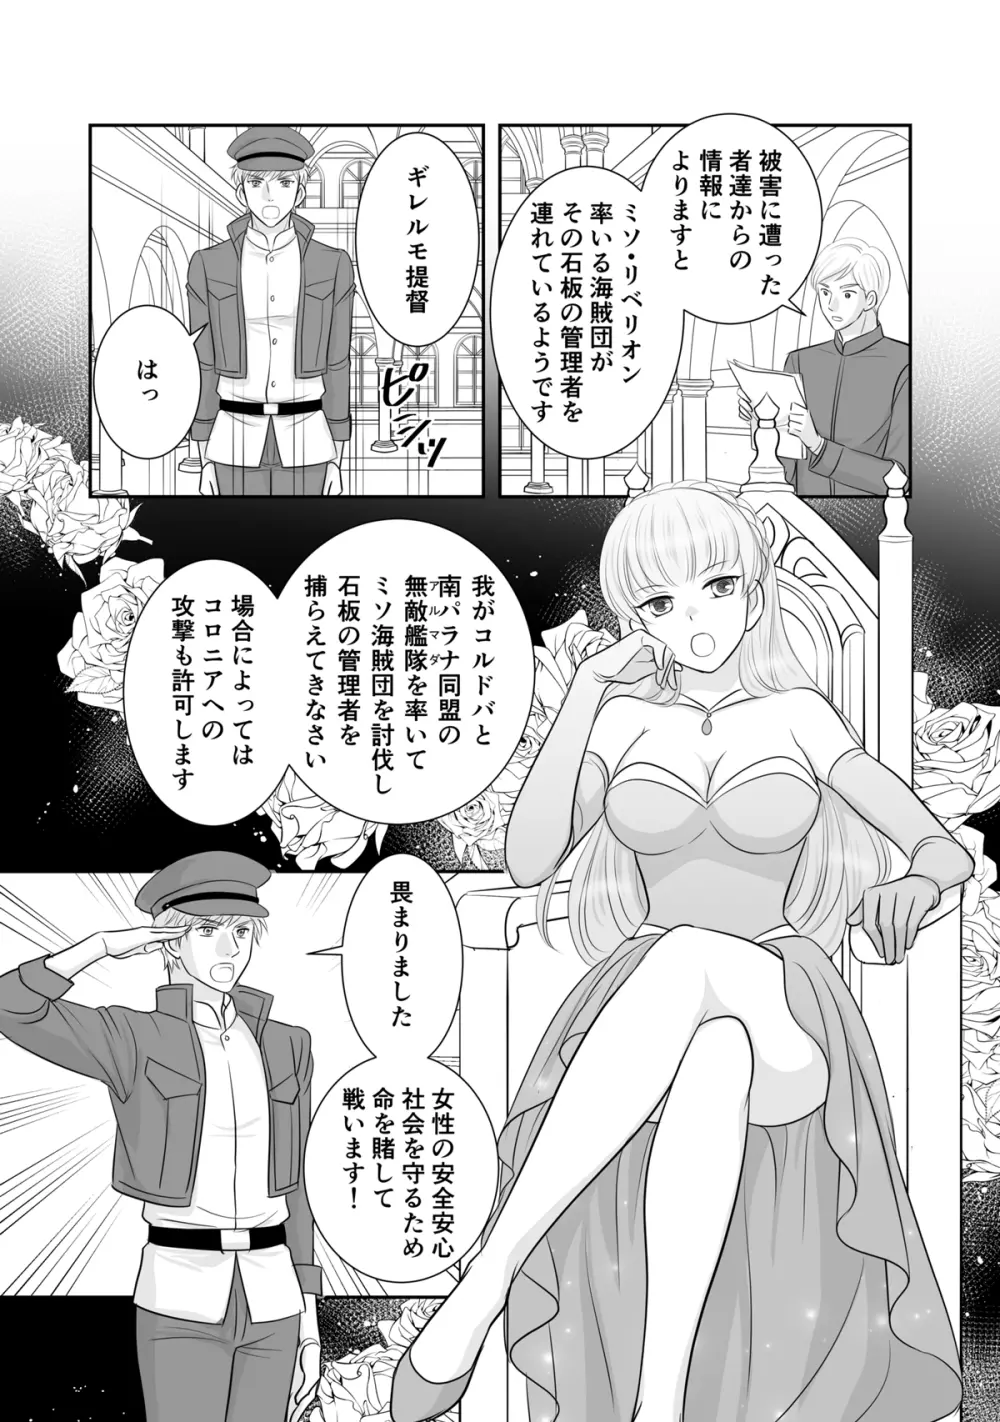 Misogyny Conquest Chapter 5 13ページ